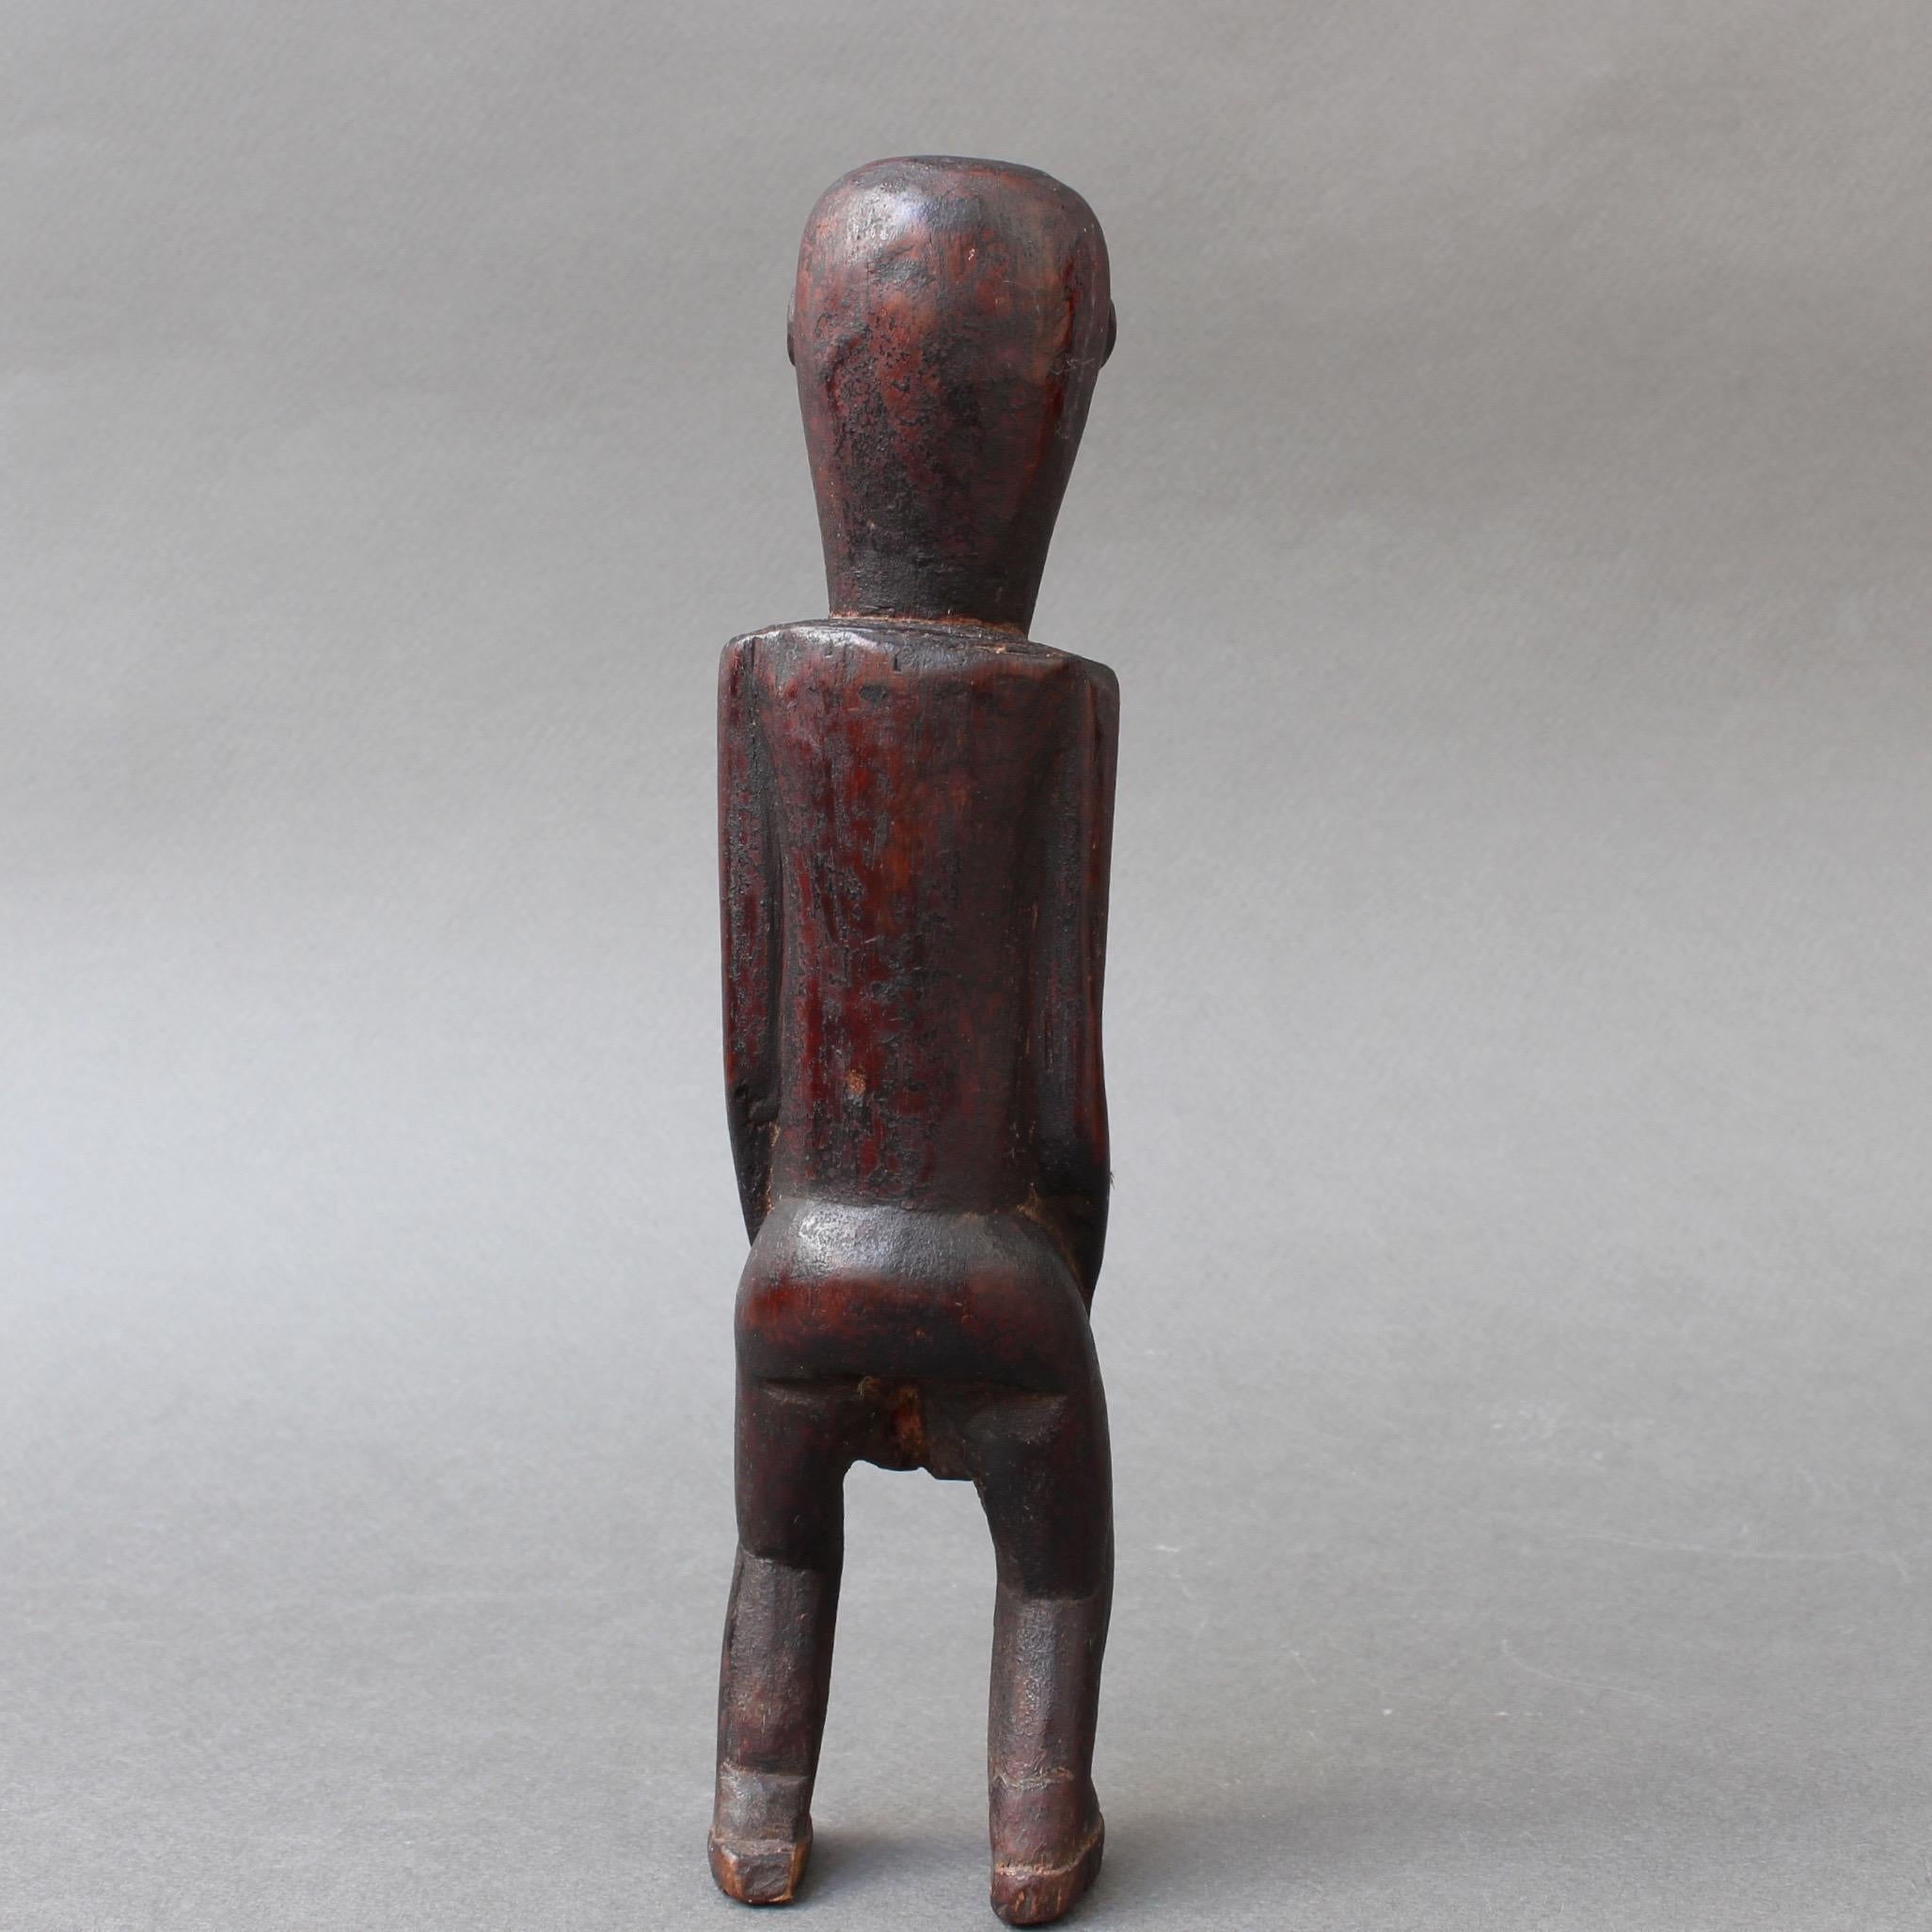 Indonesian Wooden Sculpture or Carving of Fertility Figure from Sumba Island, Indonesia